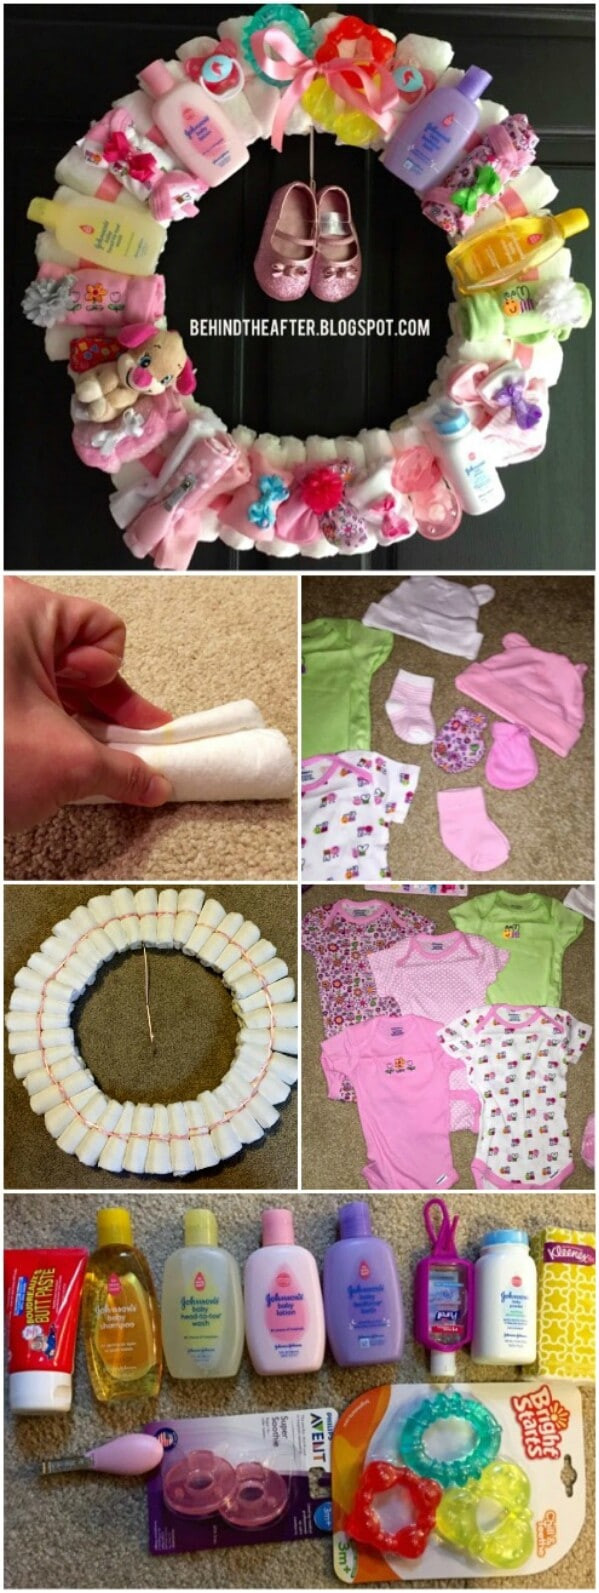 Awesome Baby Gift Ideas
 25 Enchantingly Adorable Baby Shower Gift Ideas That Will